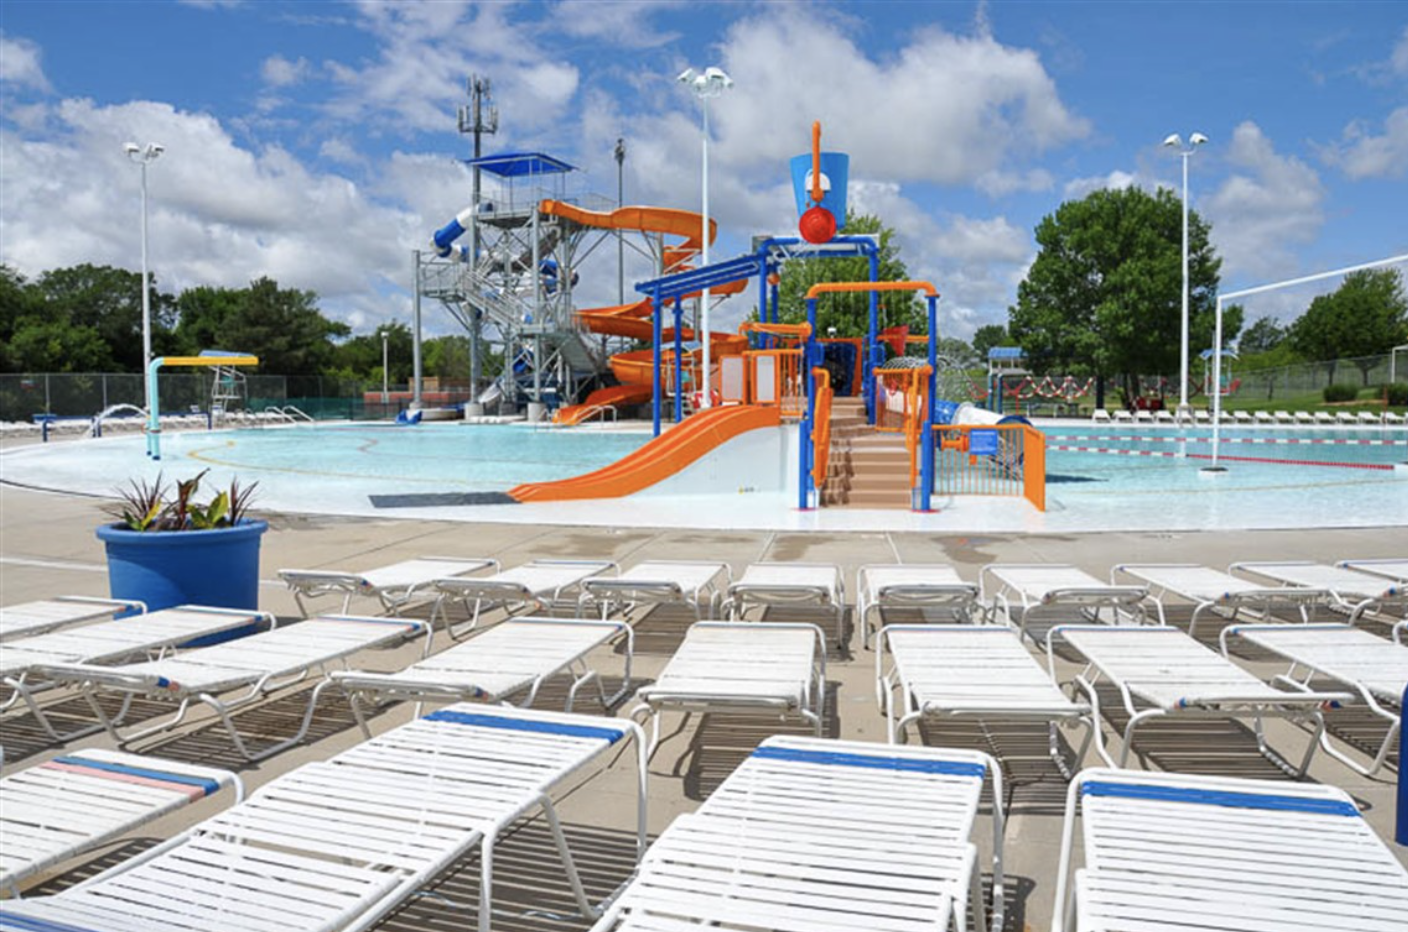 Star City Shores is just one of many swimming destinations within Lincoln.